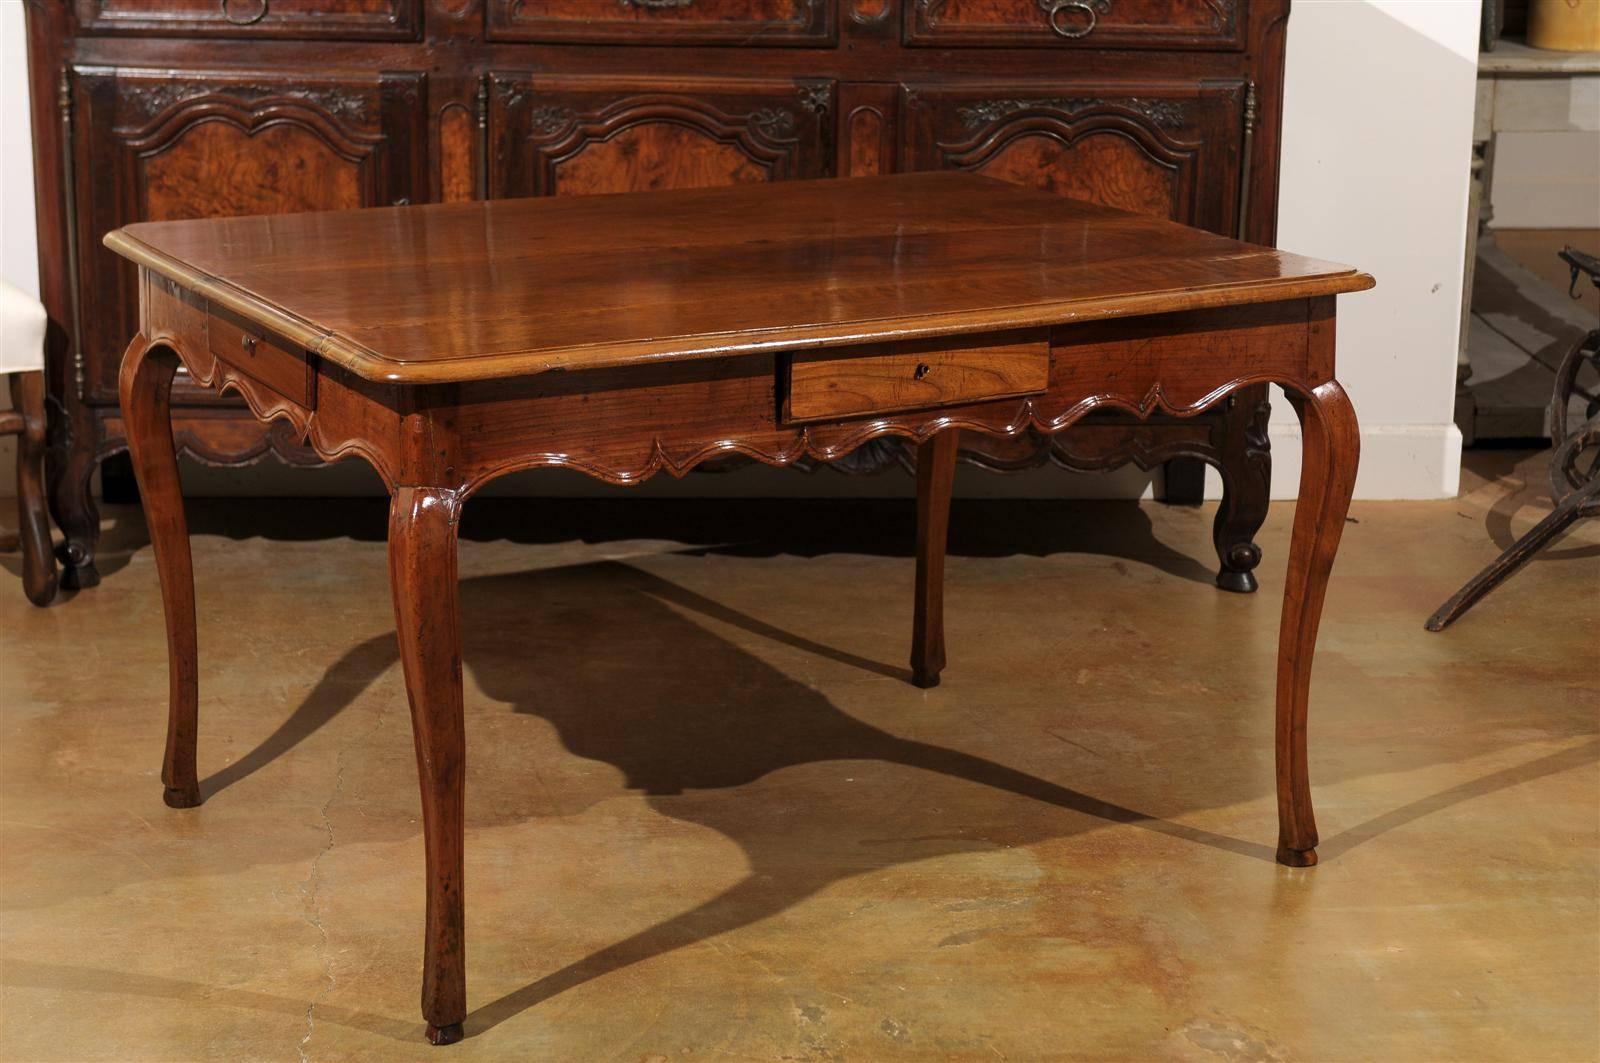 A French Louis XV style walnut four-drawer table with cabriole legs from the mid 19th century. This walnut table features a rectangular top with rounded edges, overhanging an apron comprising a drawer on each side. This apron is scalloped on all